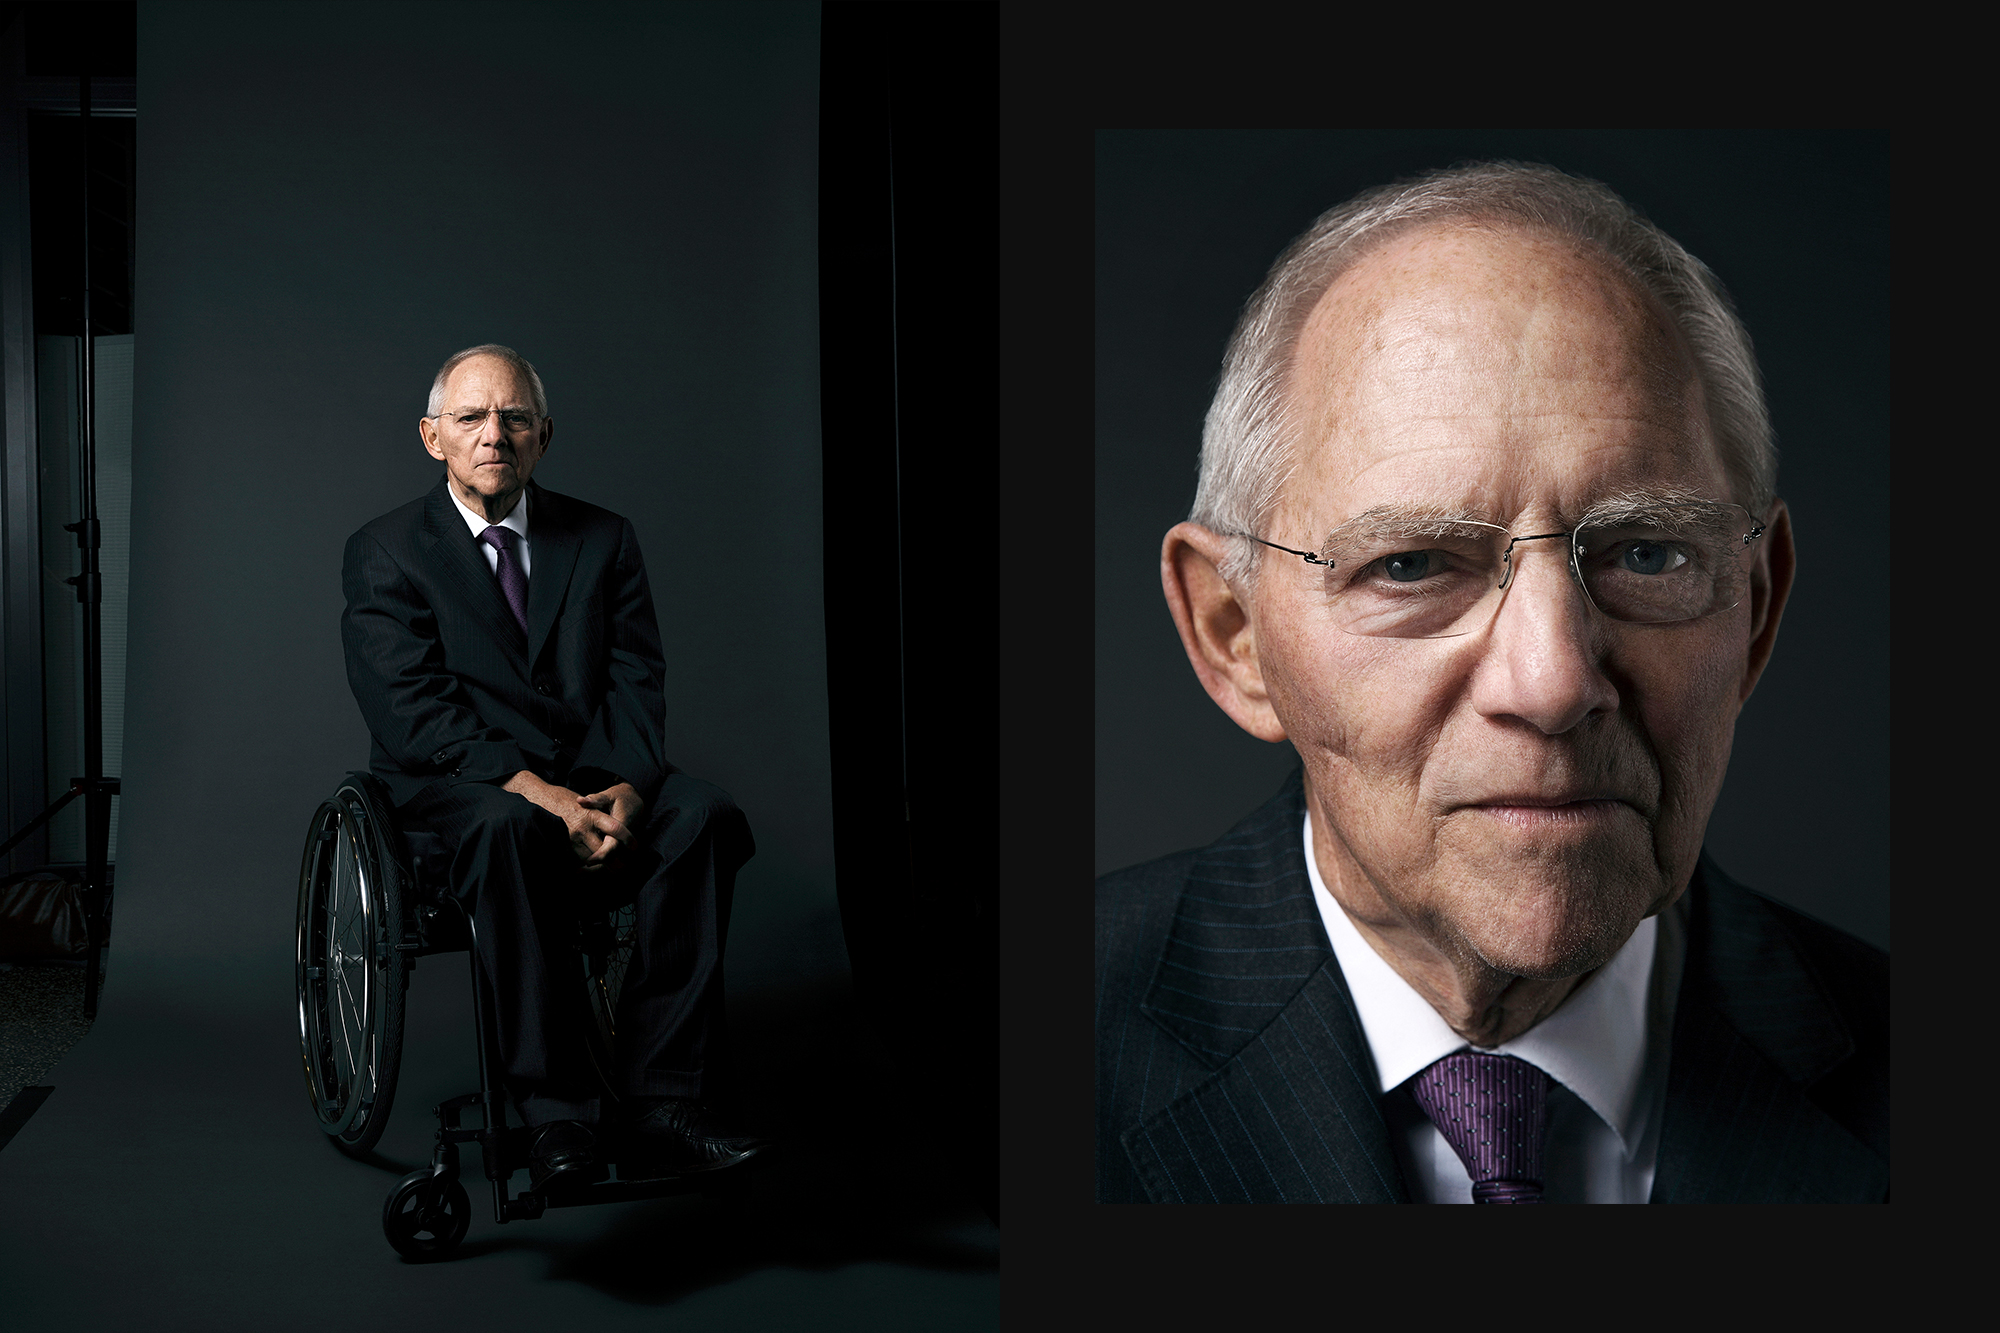 dr wolfgang schaeuble photographed by max baier and arian henning